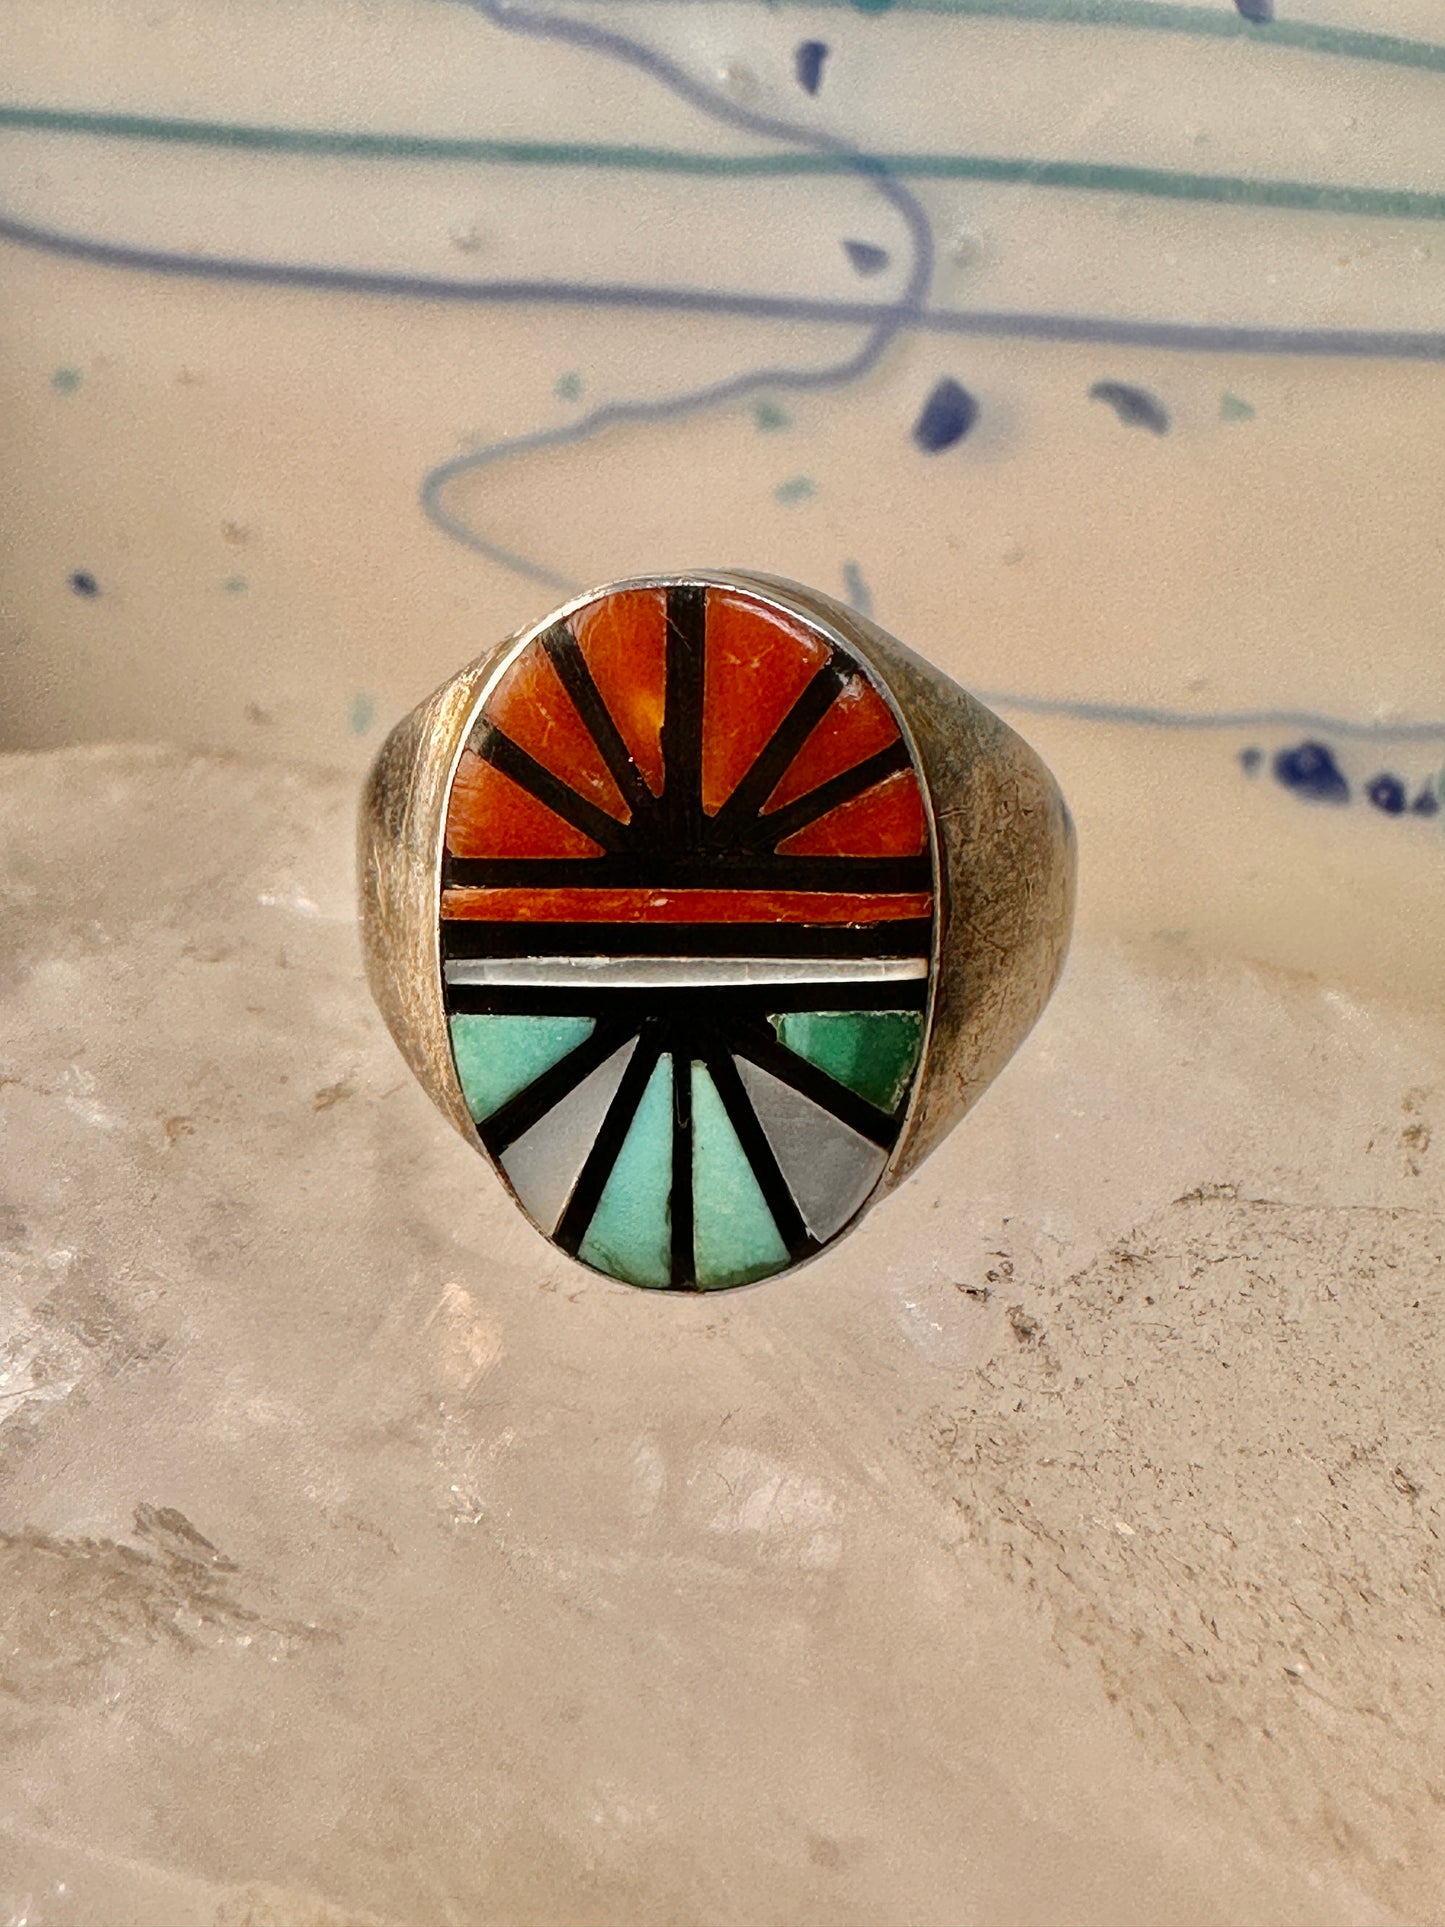 Turquoise Ring Zuni coral inlay mother of pearl boho size 10.7 sterling silver women men